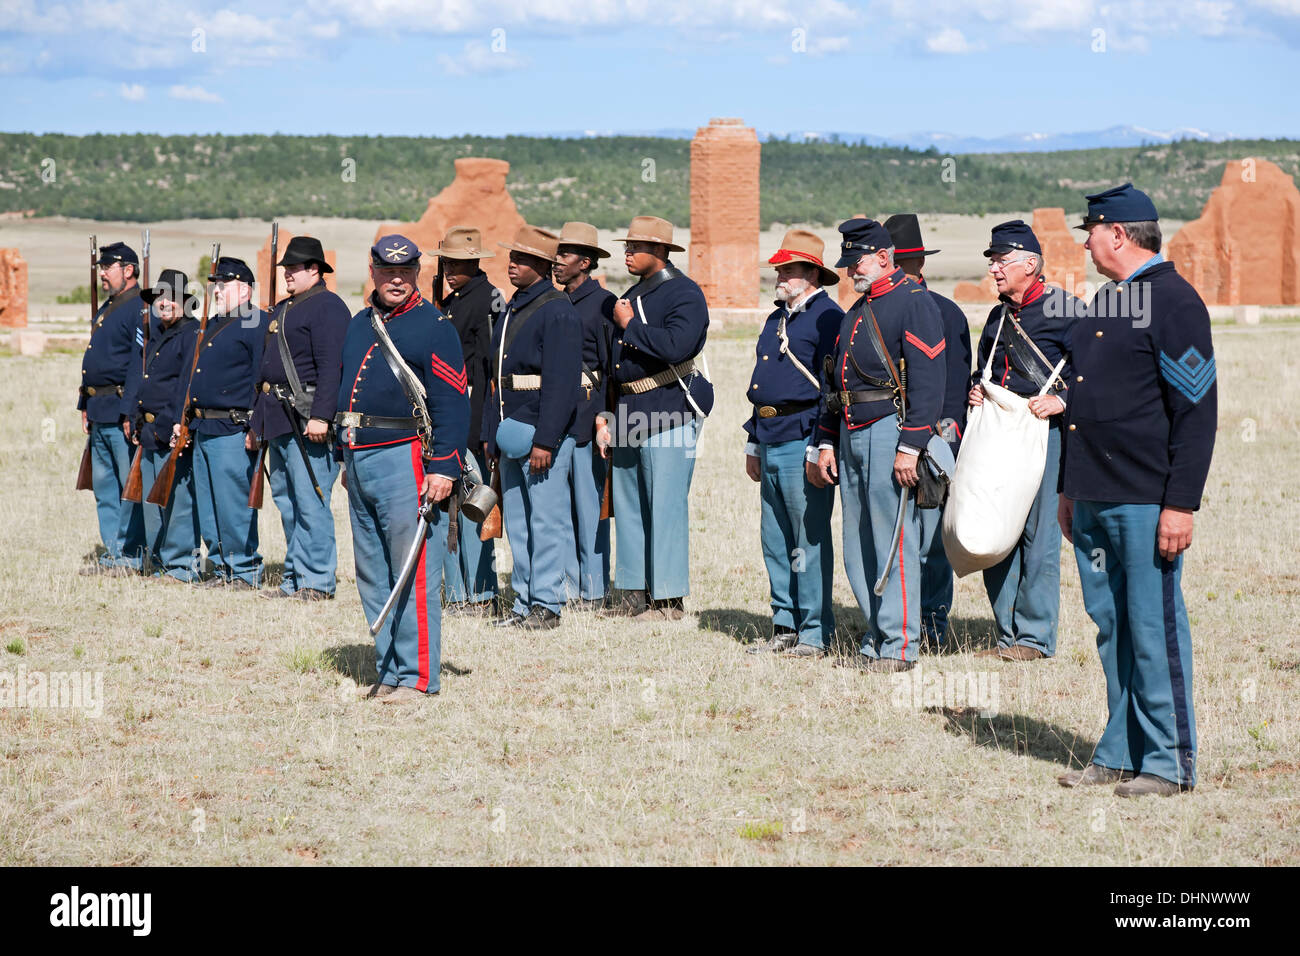 Civil War Era Union soldier reenactors stand in formation before flag-raising ceremony, Fort Union National Monument, NM USA Stock Photo